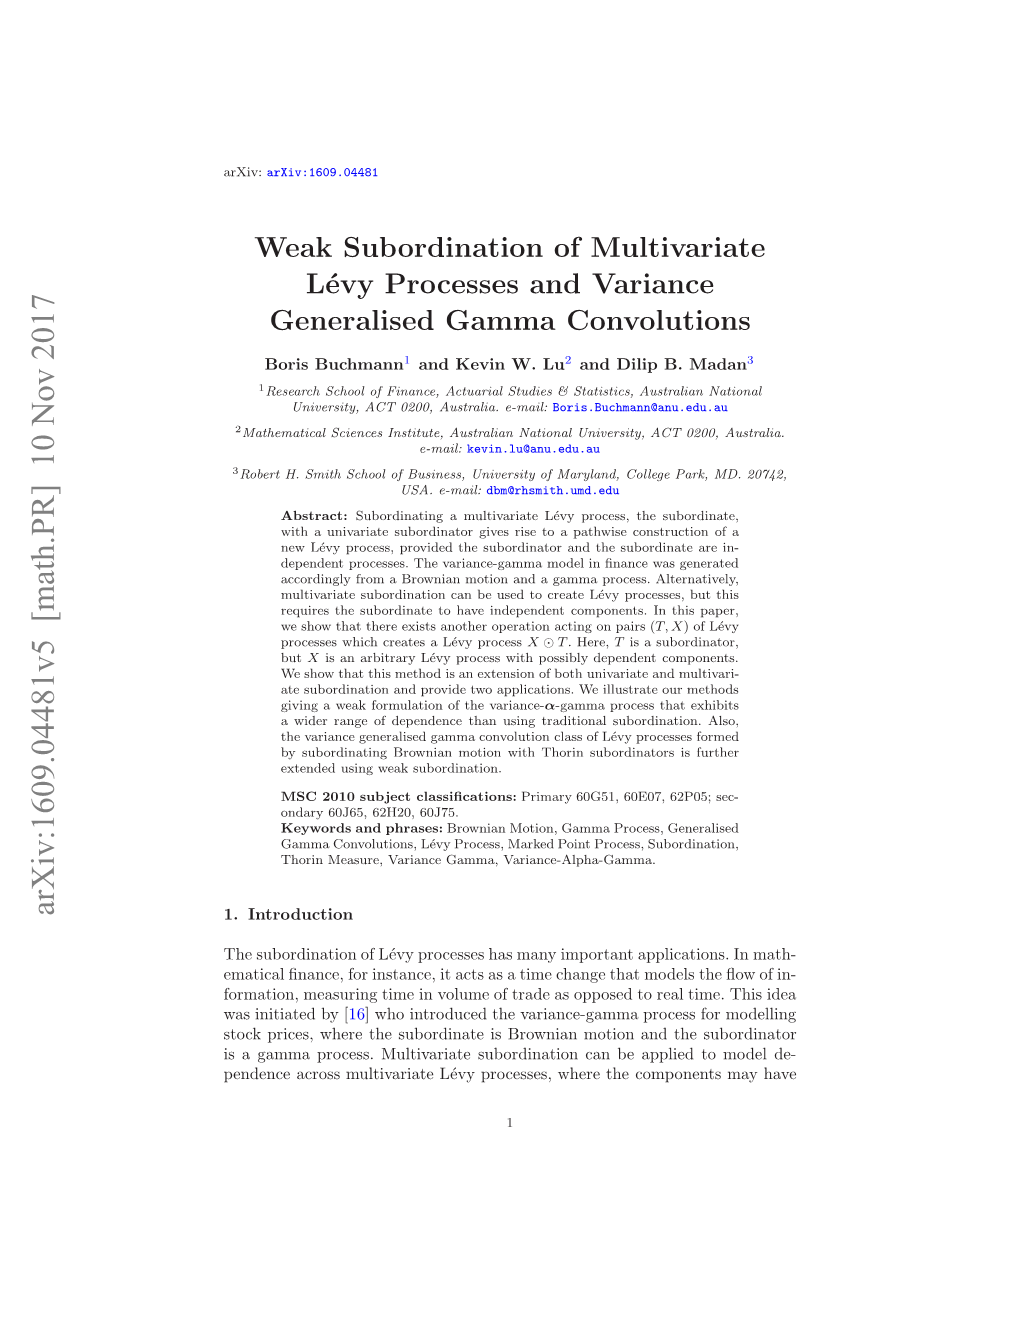 Weak Subordination of Multivariate Lévy Processes and Variance